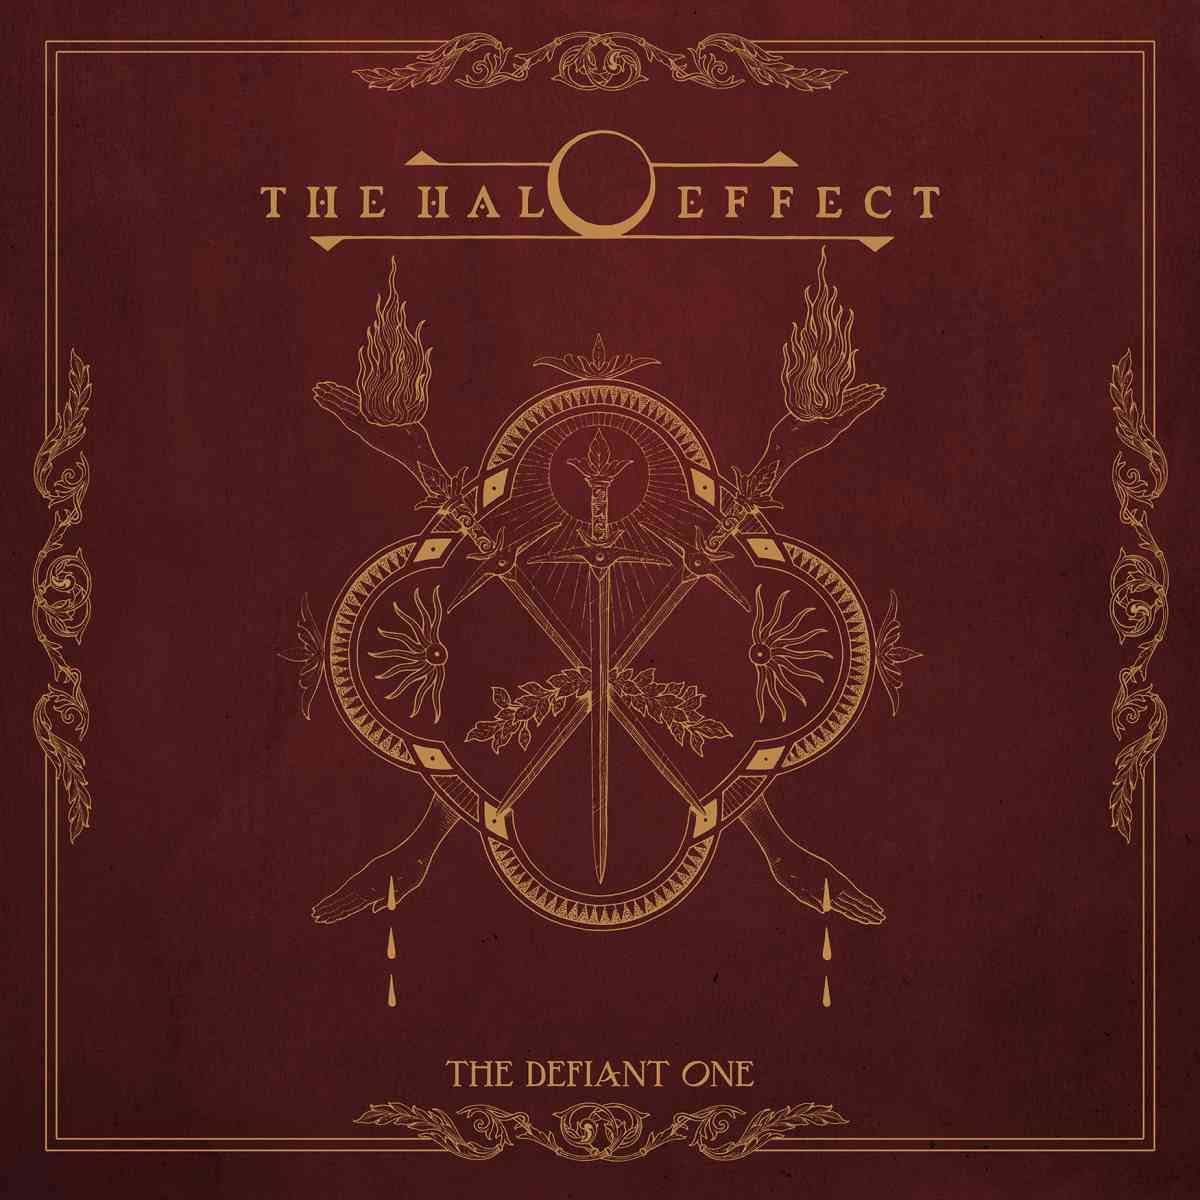 THE HALO EFFECT - the defiant one - single cover